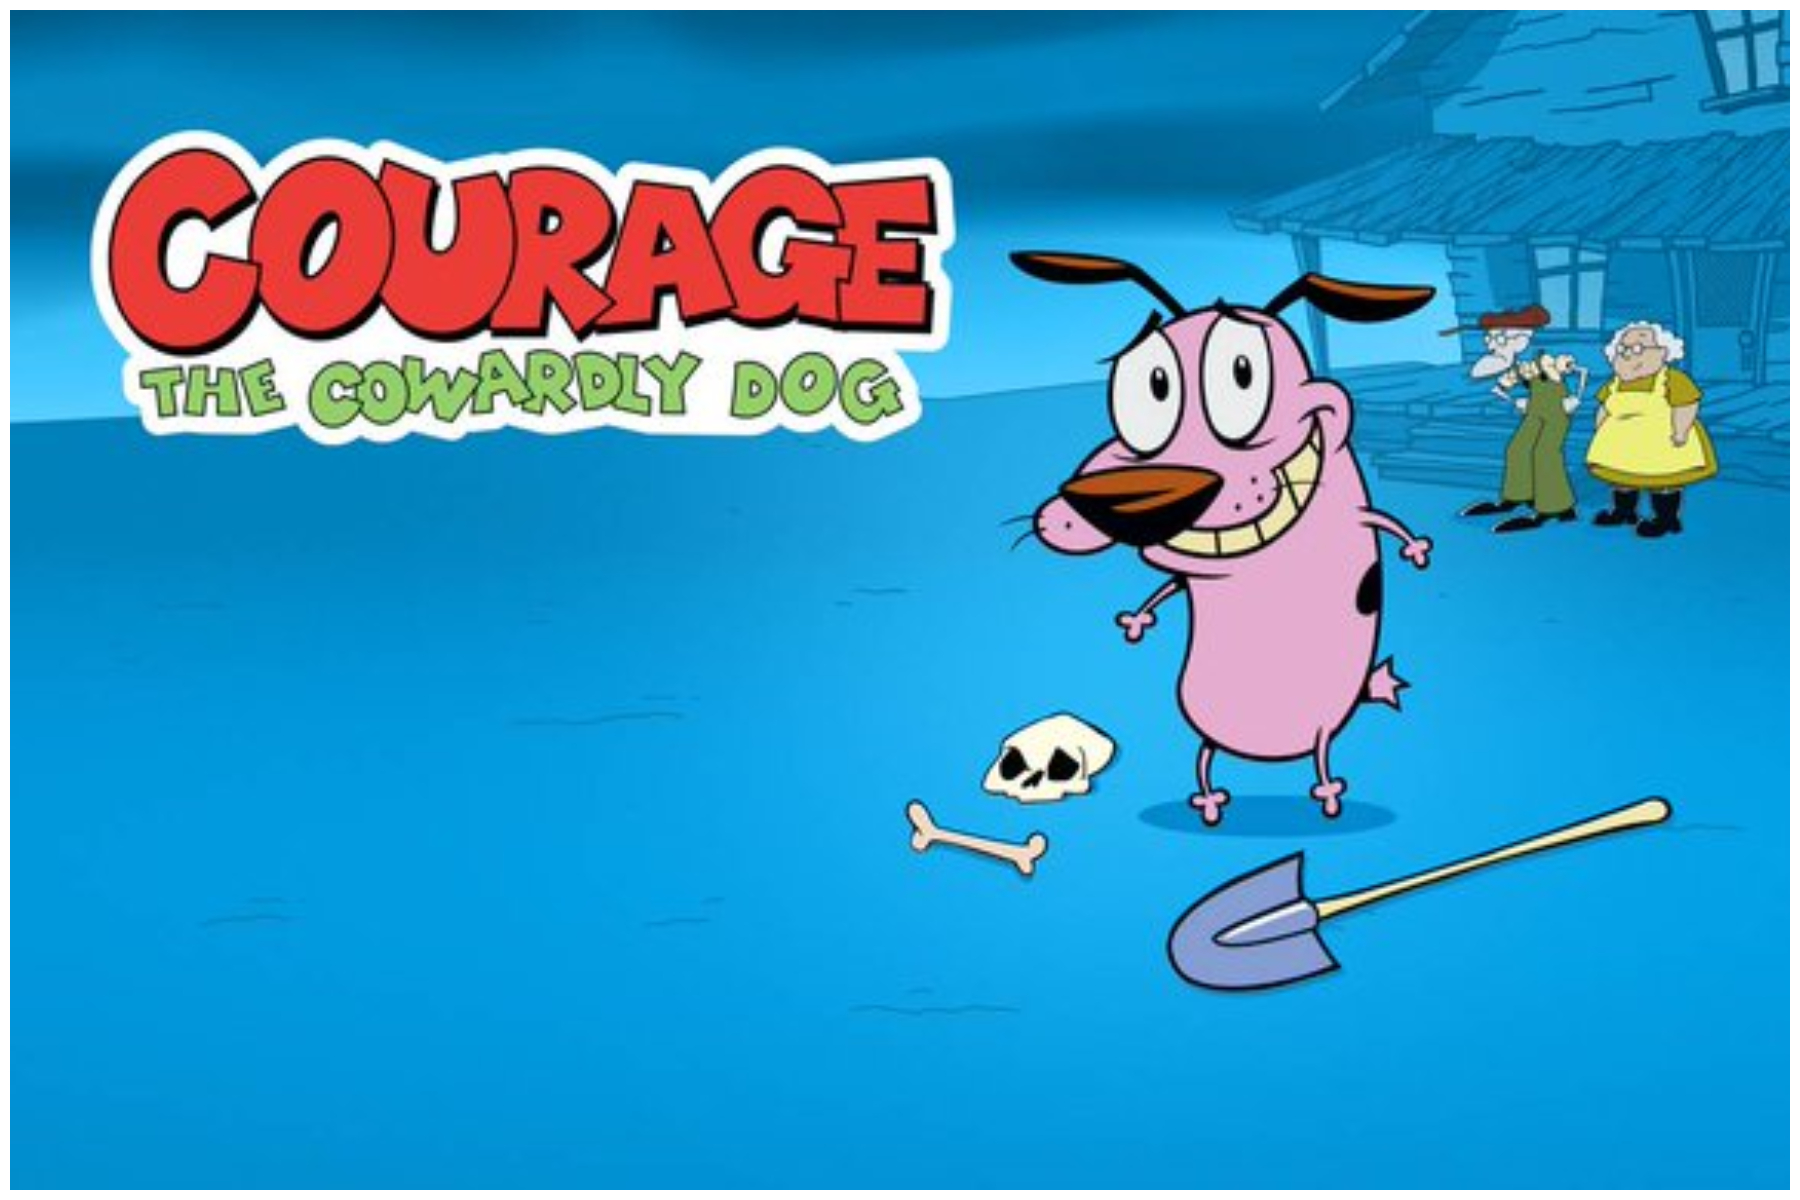 Is courage the cowardly dog based on a true story